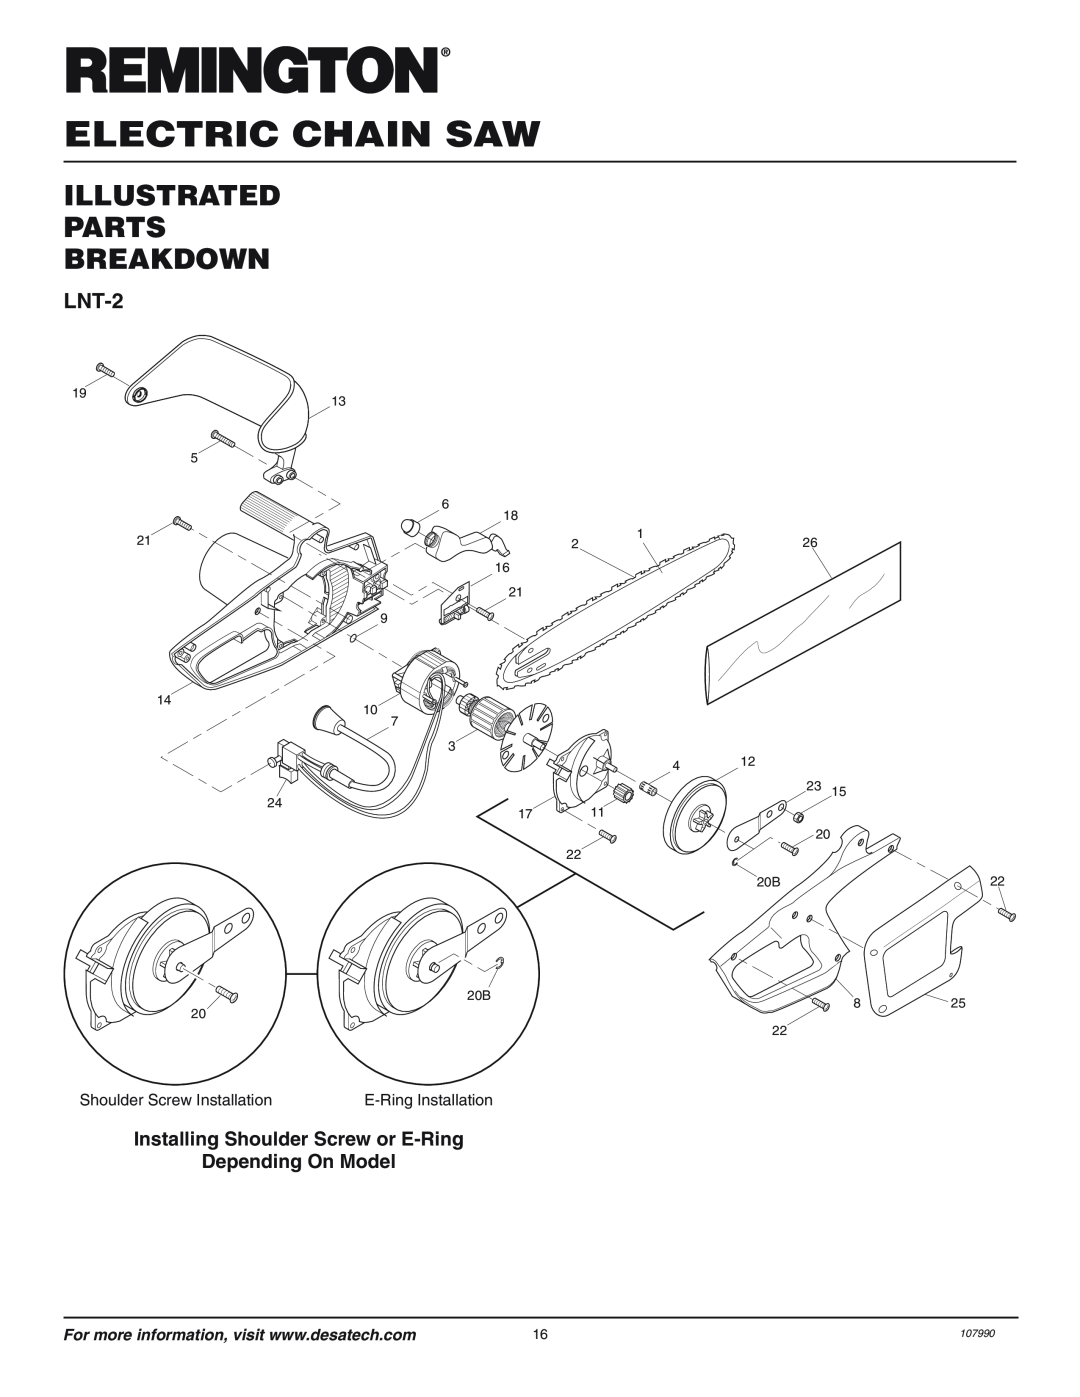 Remington Illustrated Parts Breakdown, LNT-2, Installing Shoulder Screw or E-Ring Depending On Model, Electric Chain Saw 